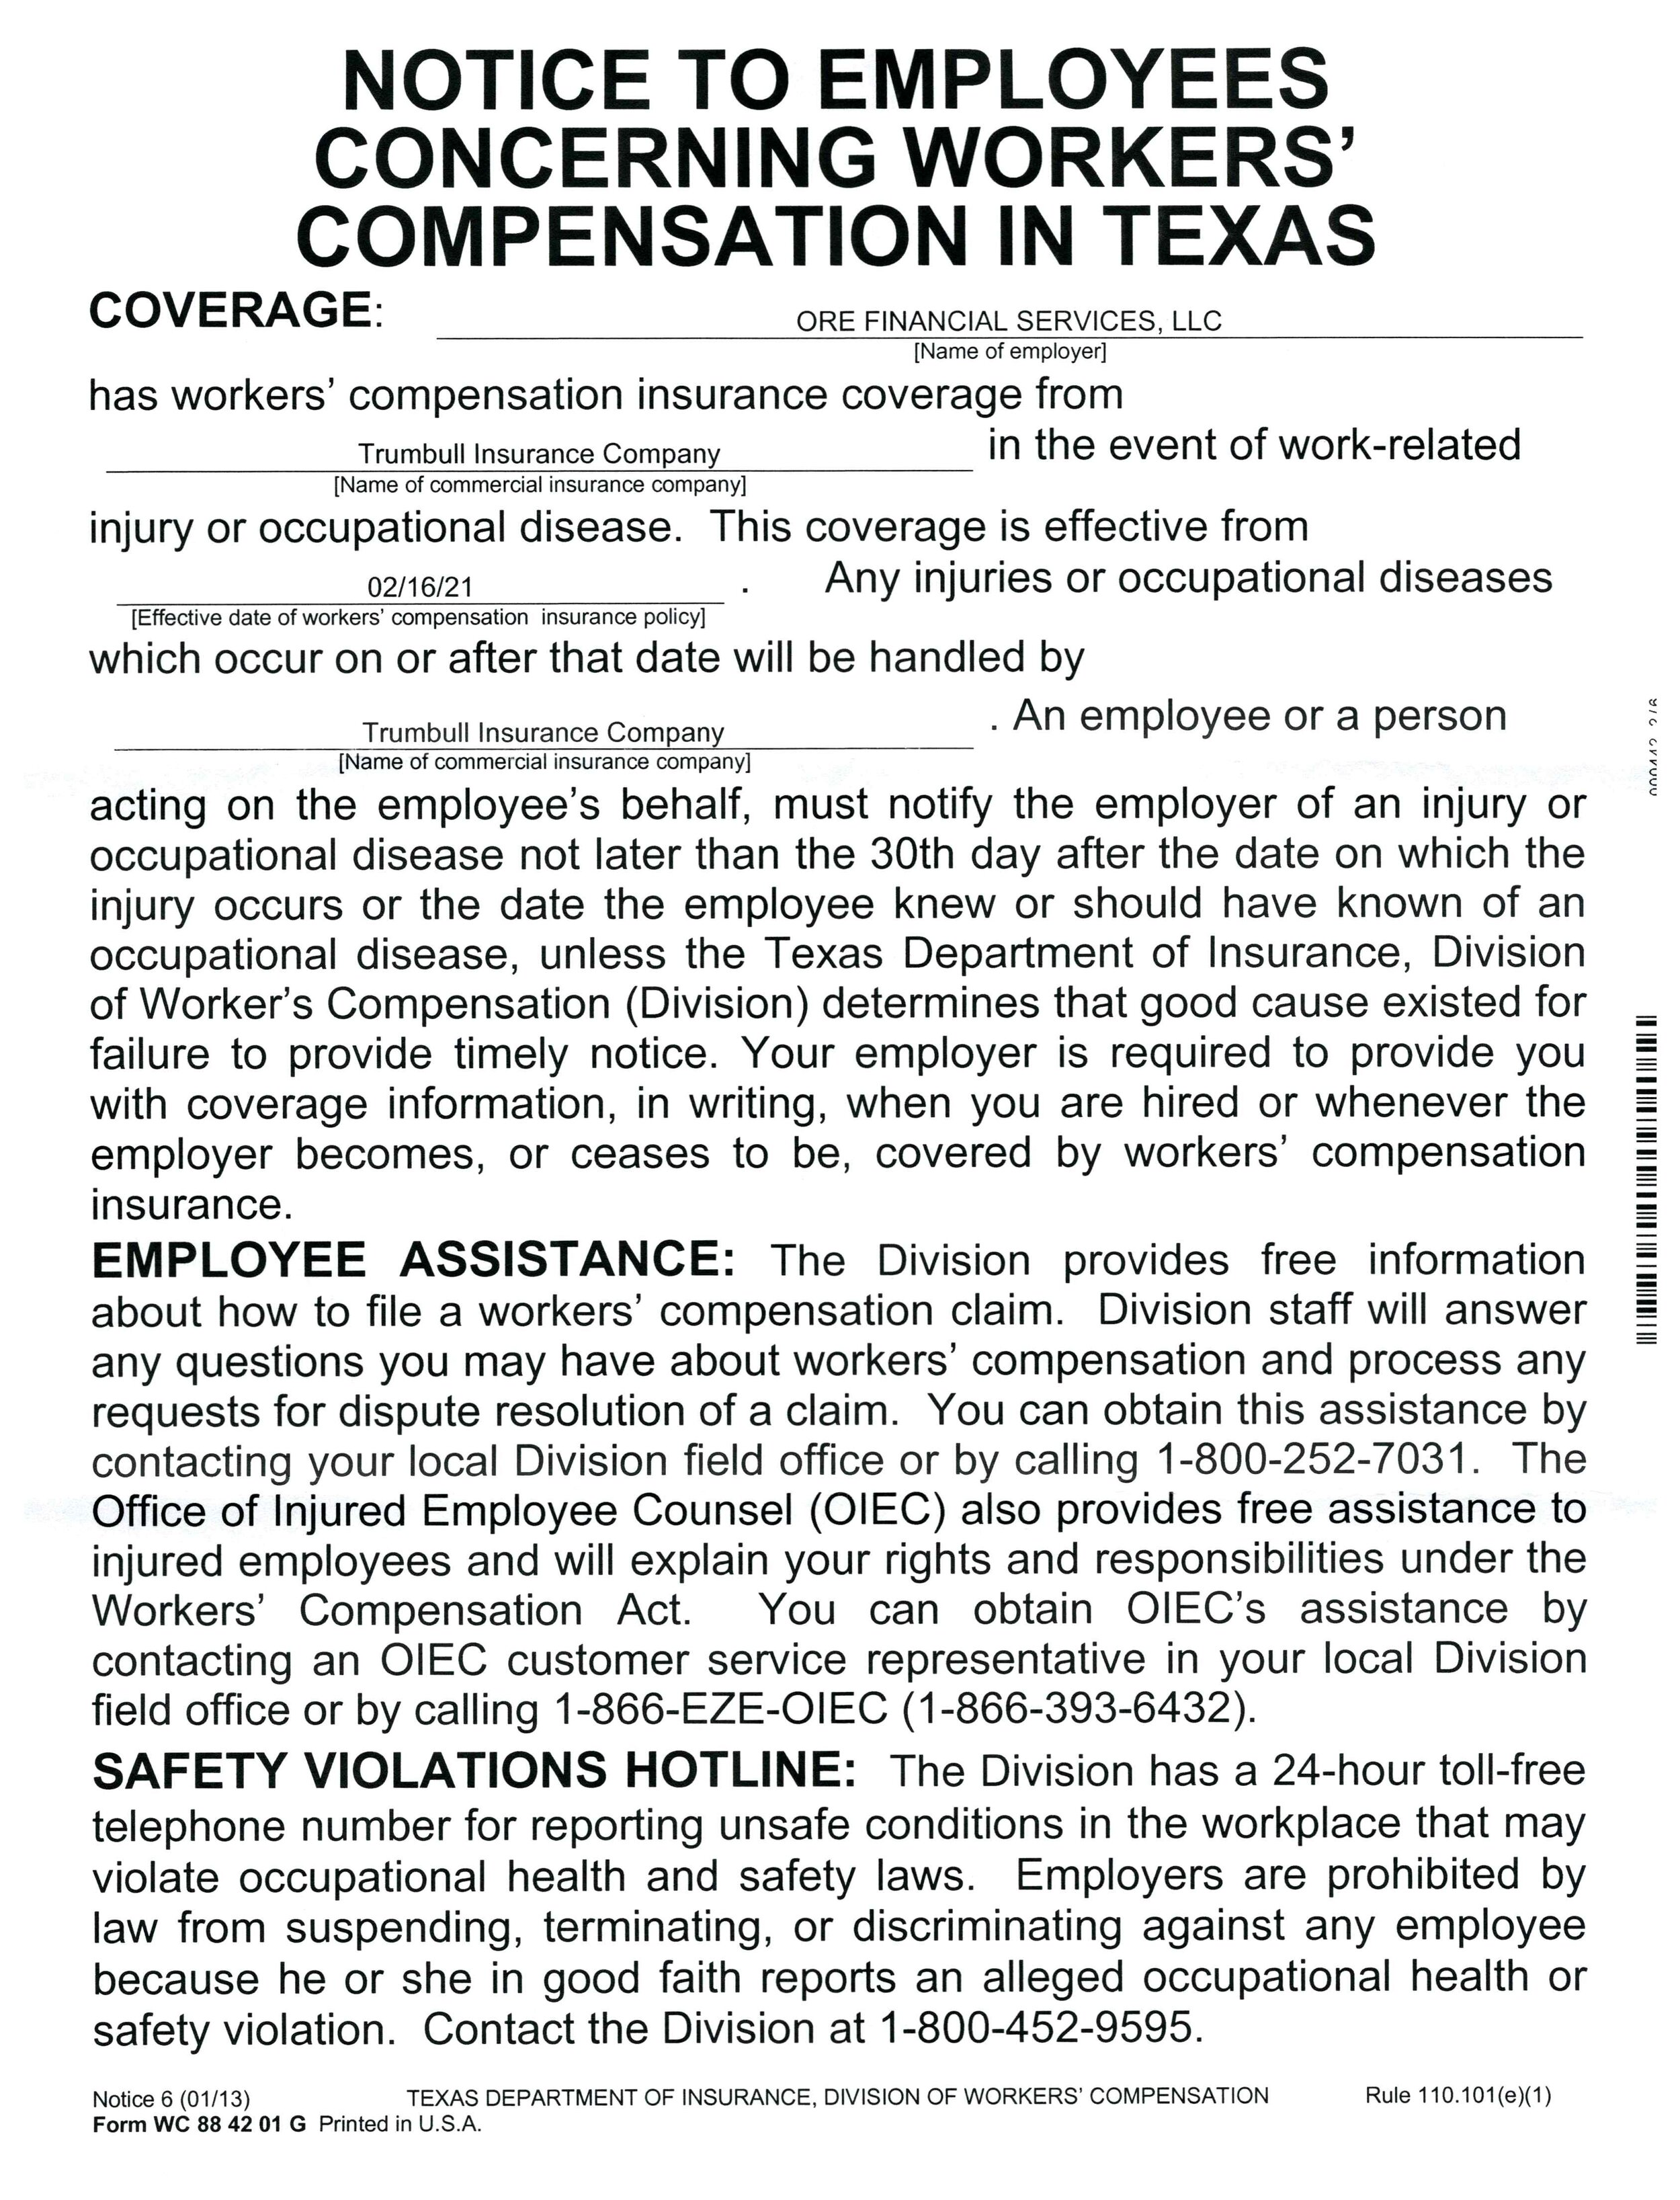 The Hartford Workers' Compensation_Page_1.jpg